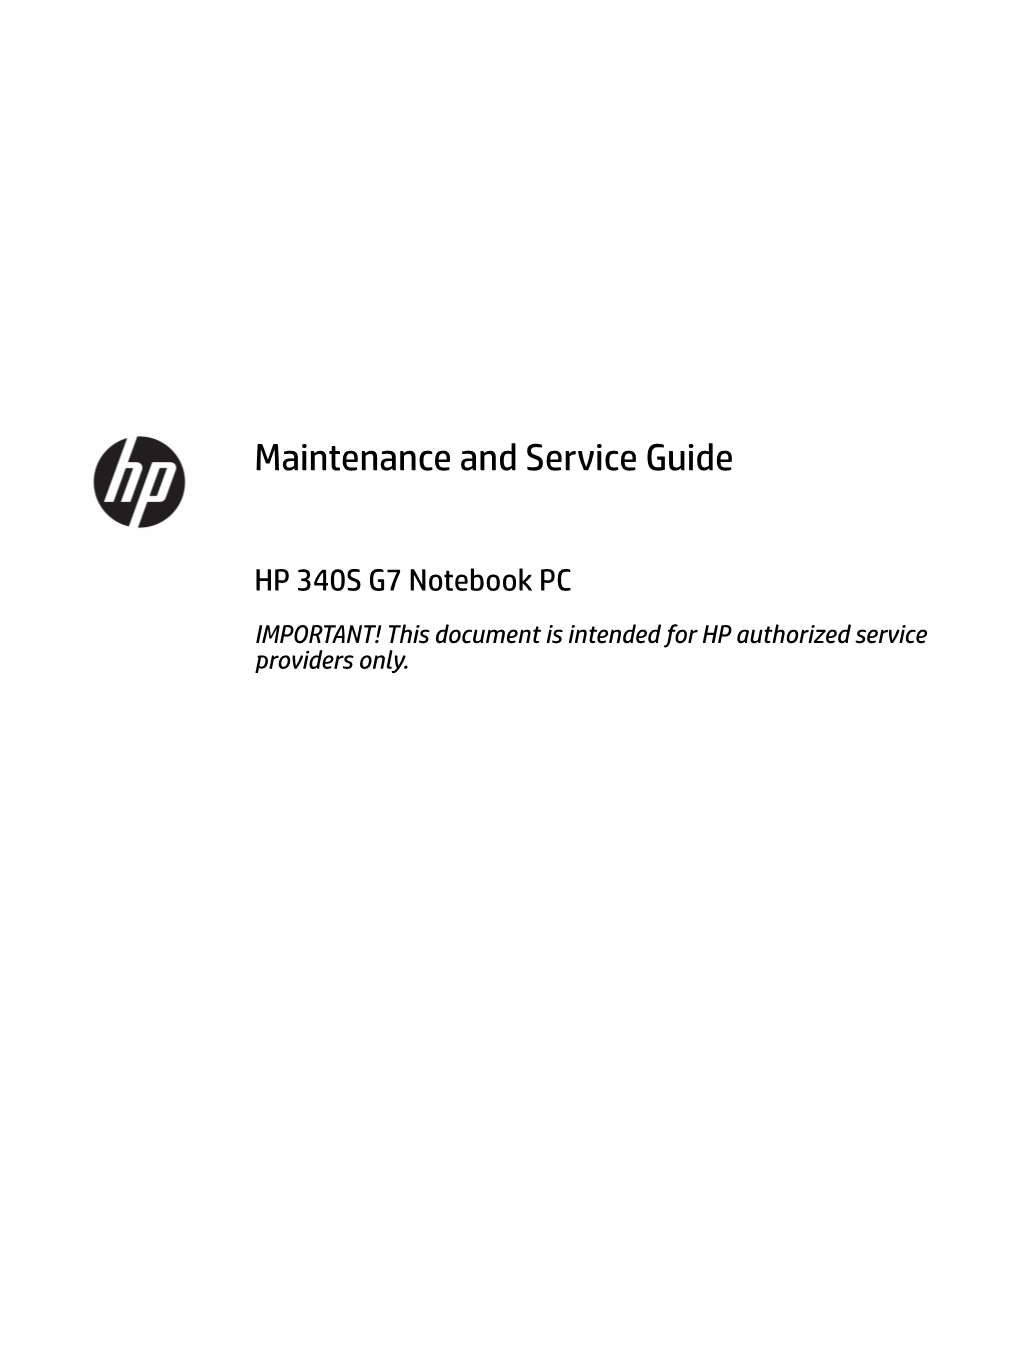 Maintenance and Service Guide HP 340S G7 Notebook PC